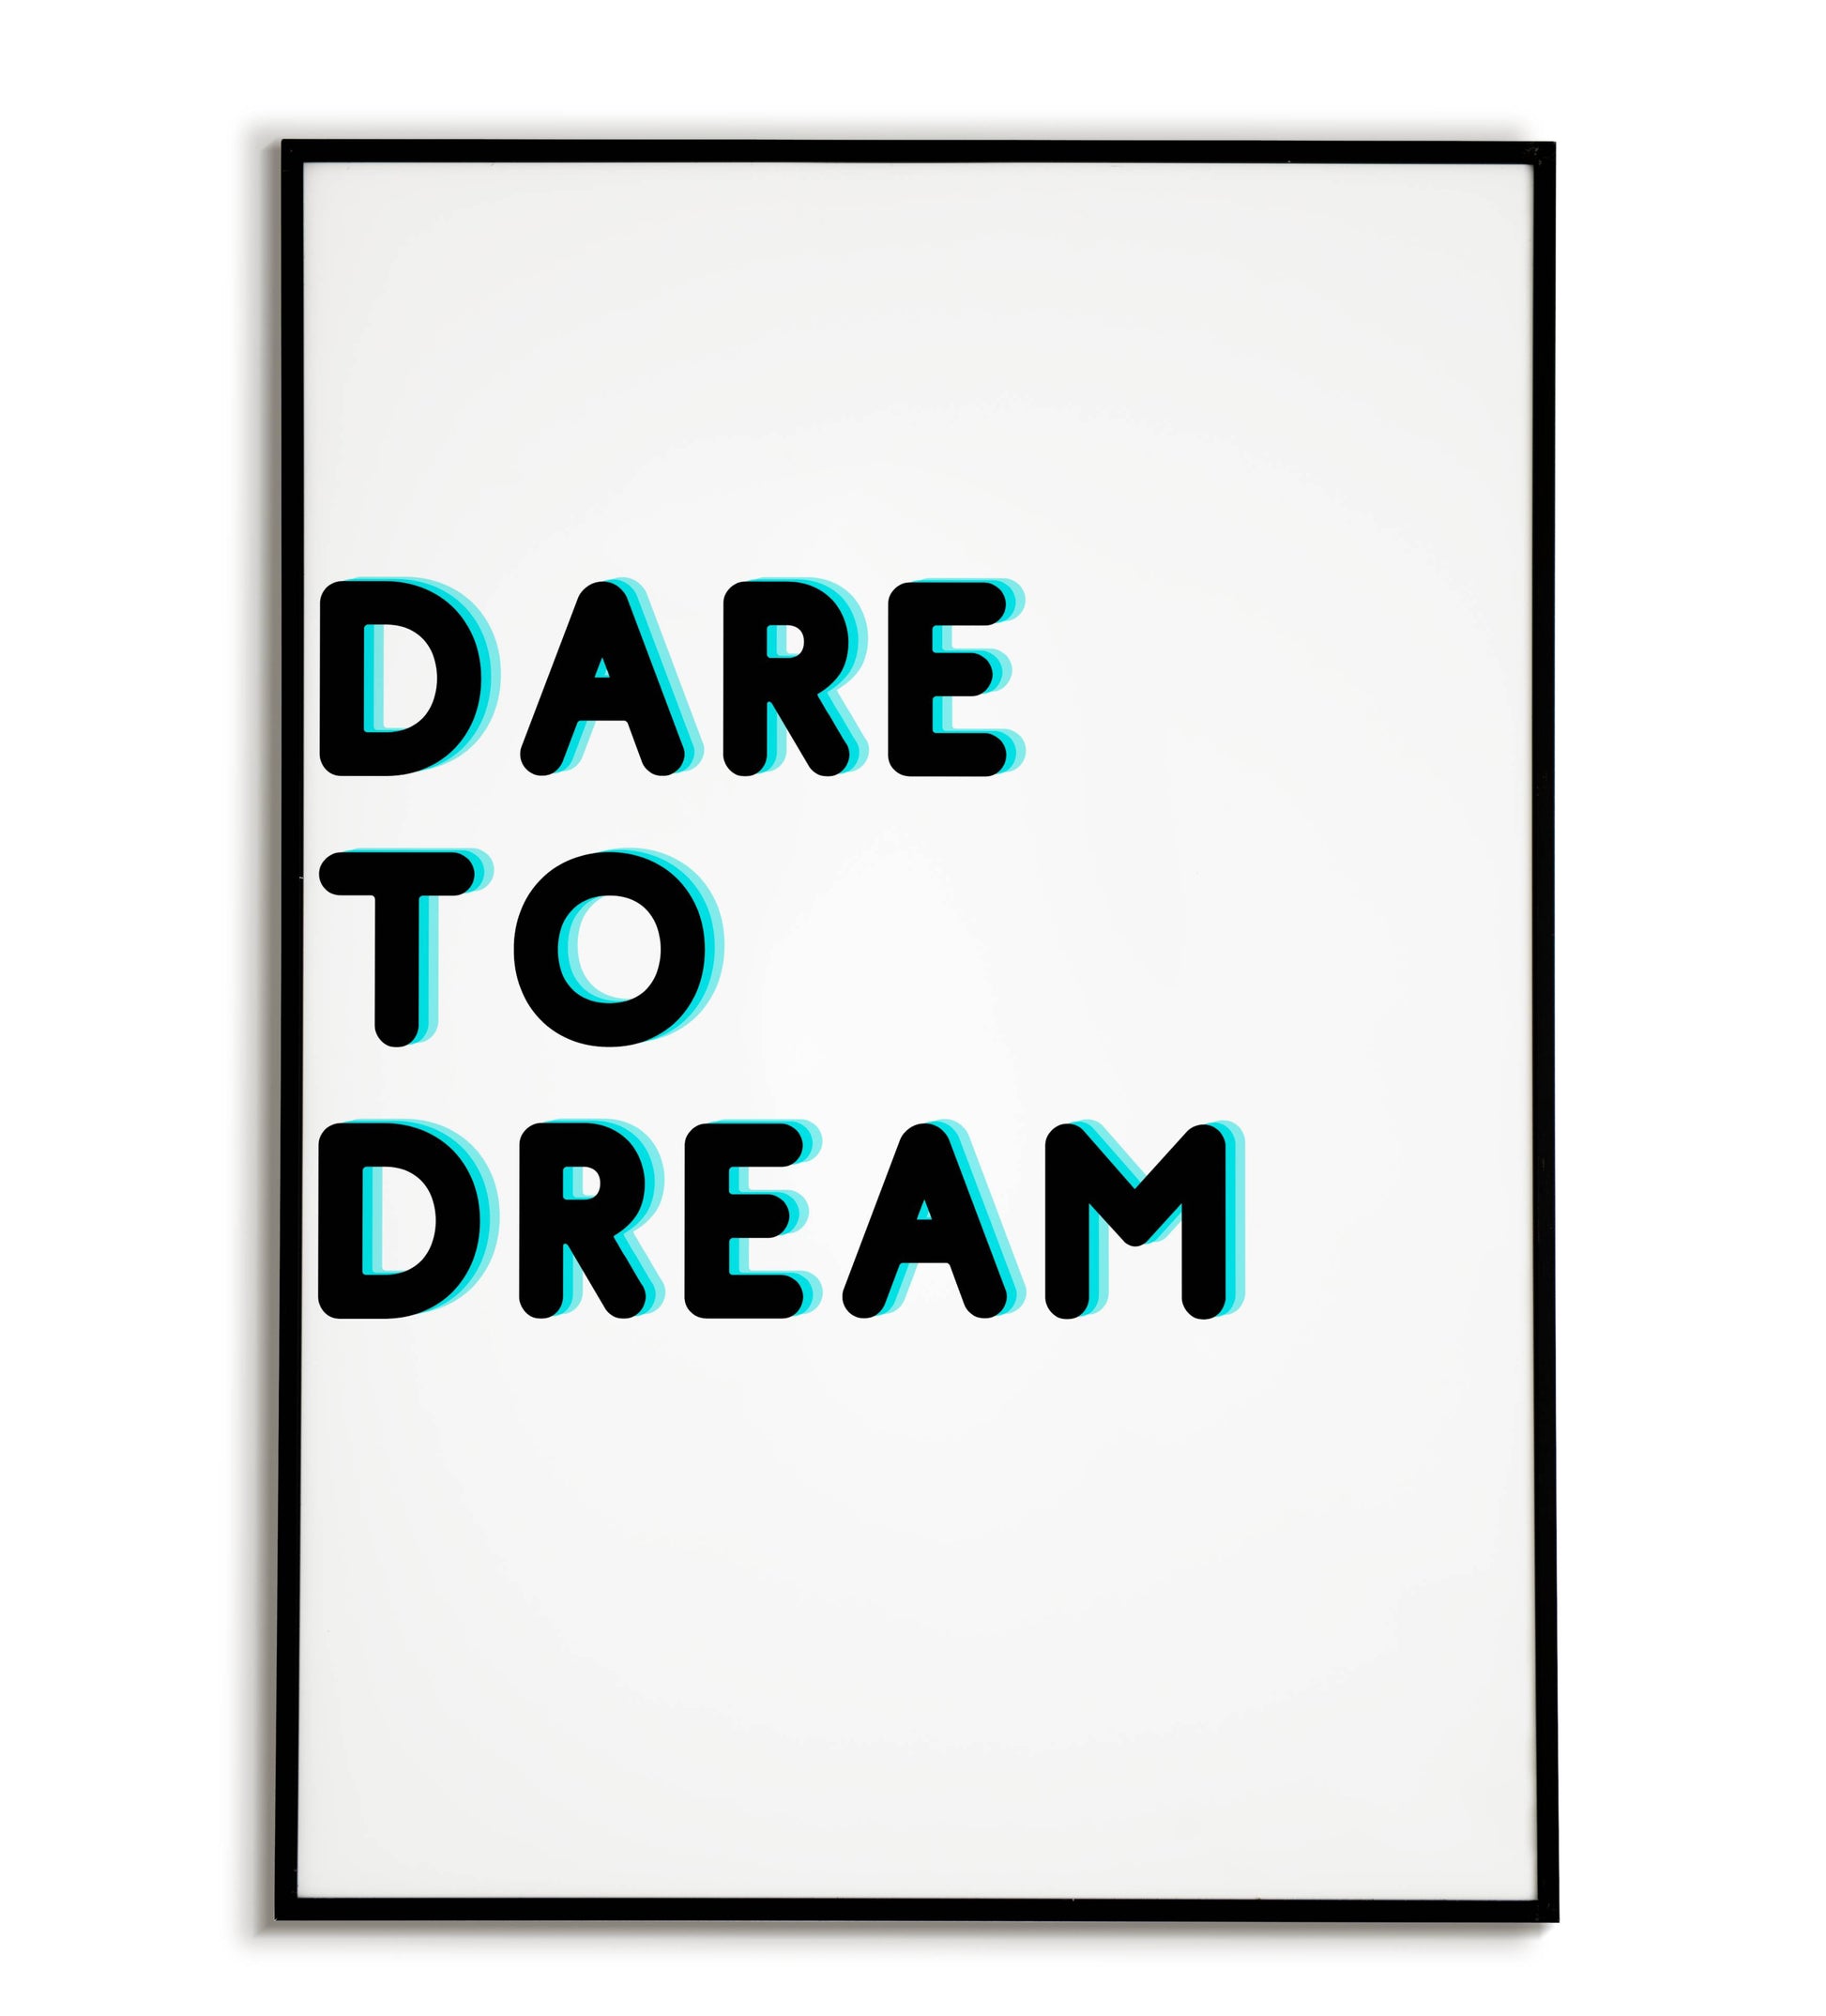 Inspirational "Dare to dream" printable poster, encourage ambition and pursuing your goals.	